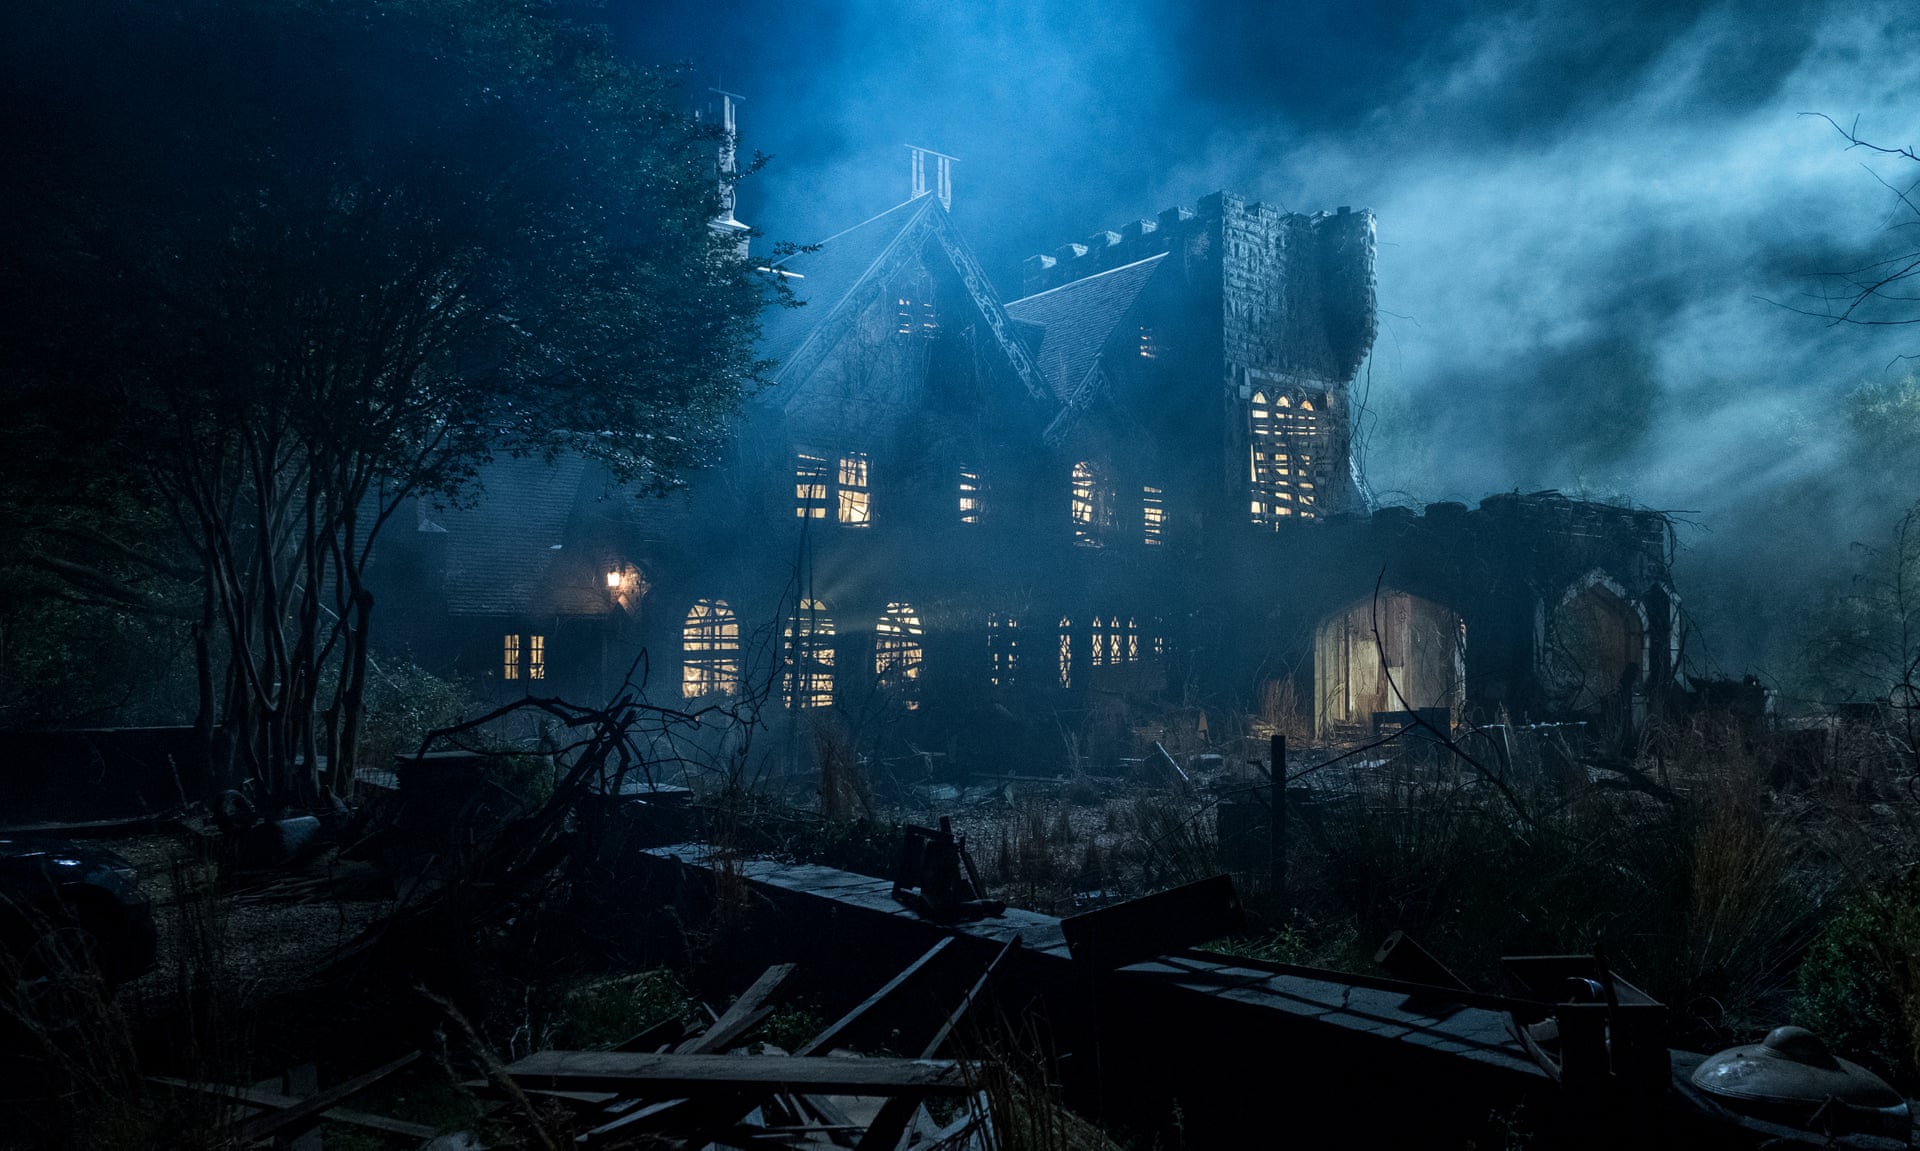 The Haunting of Hill House has been described as 'nearly perfect' by Stephen King